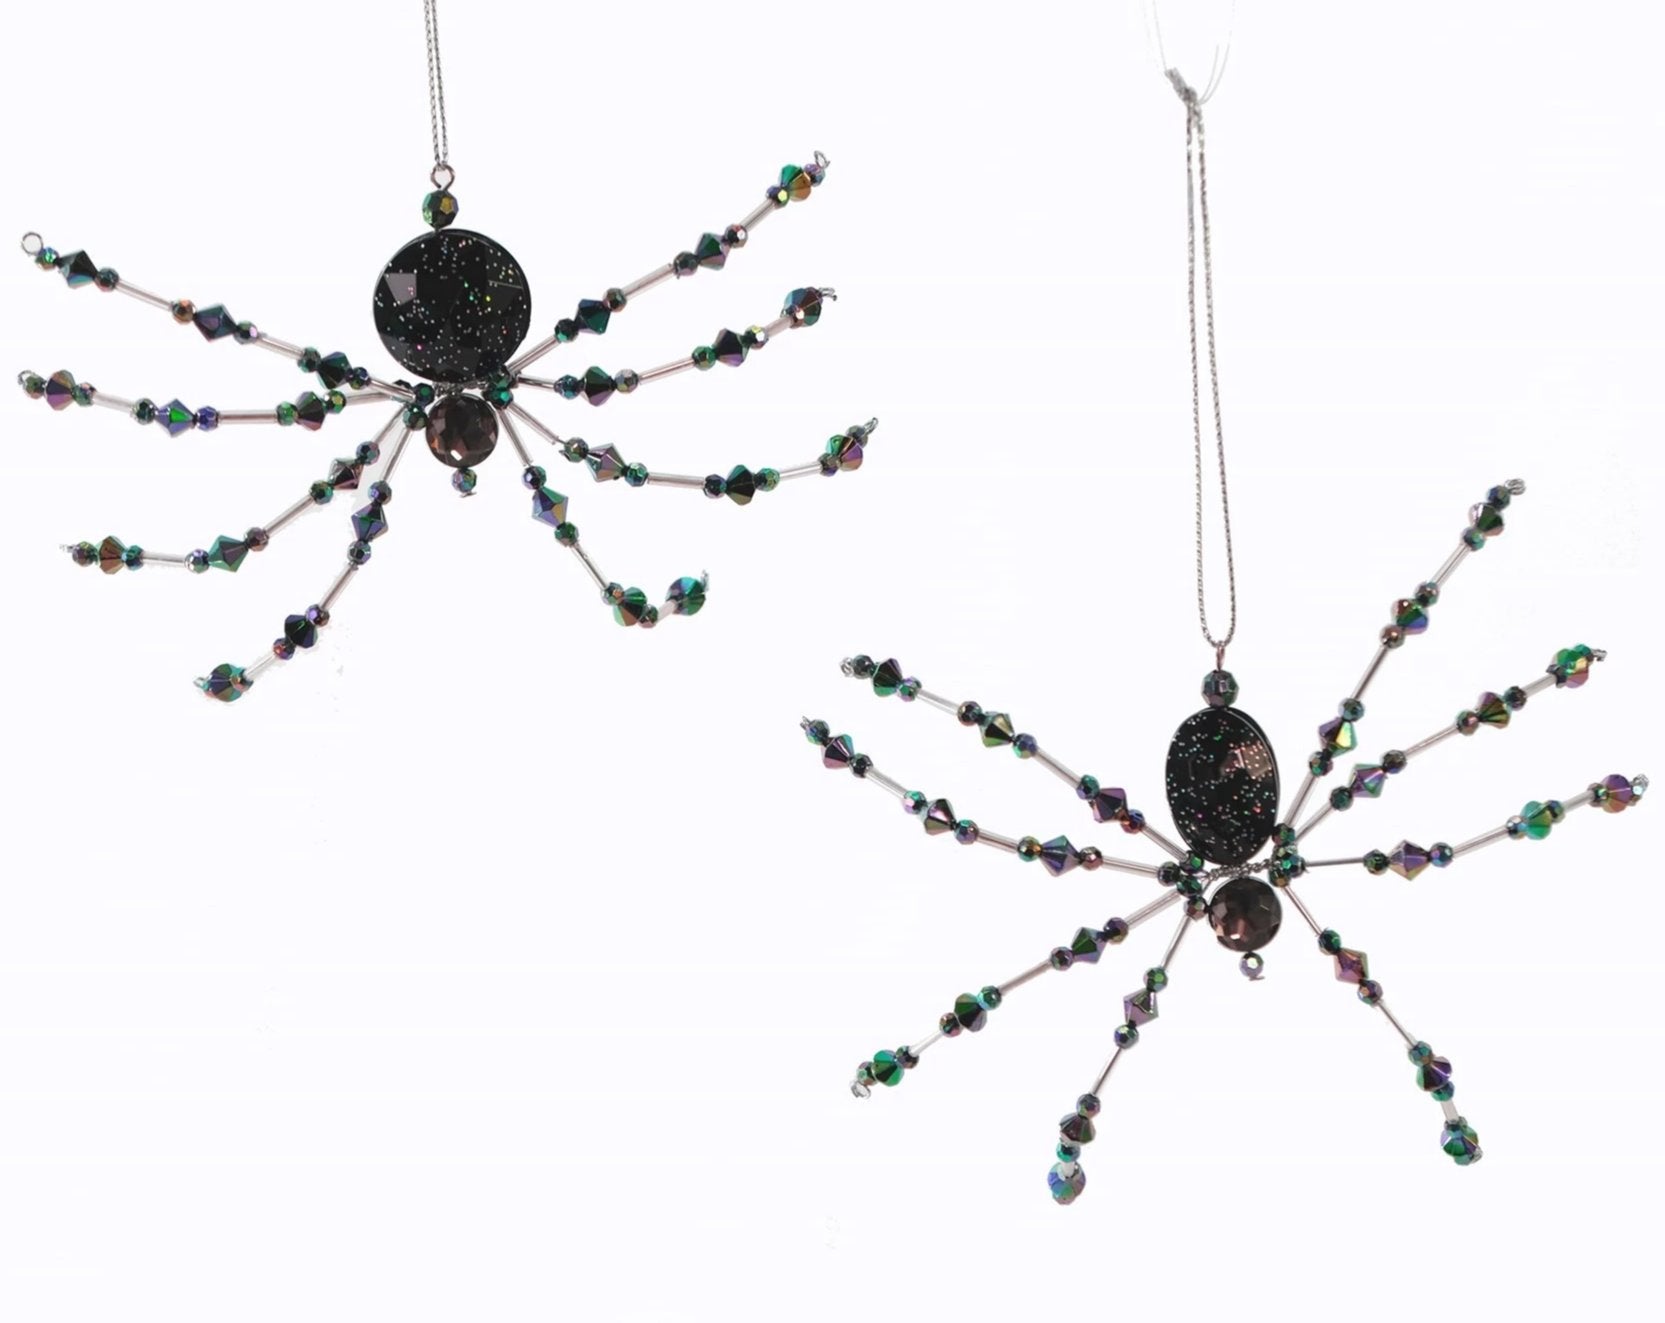 Speckled Spider Ornaments